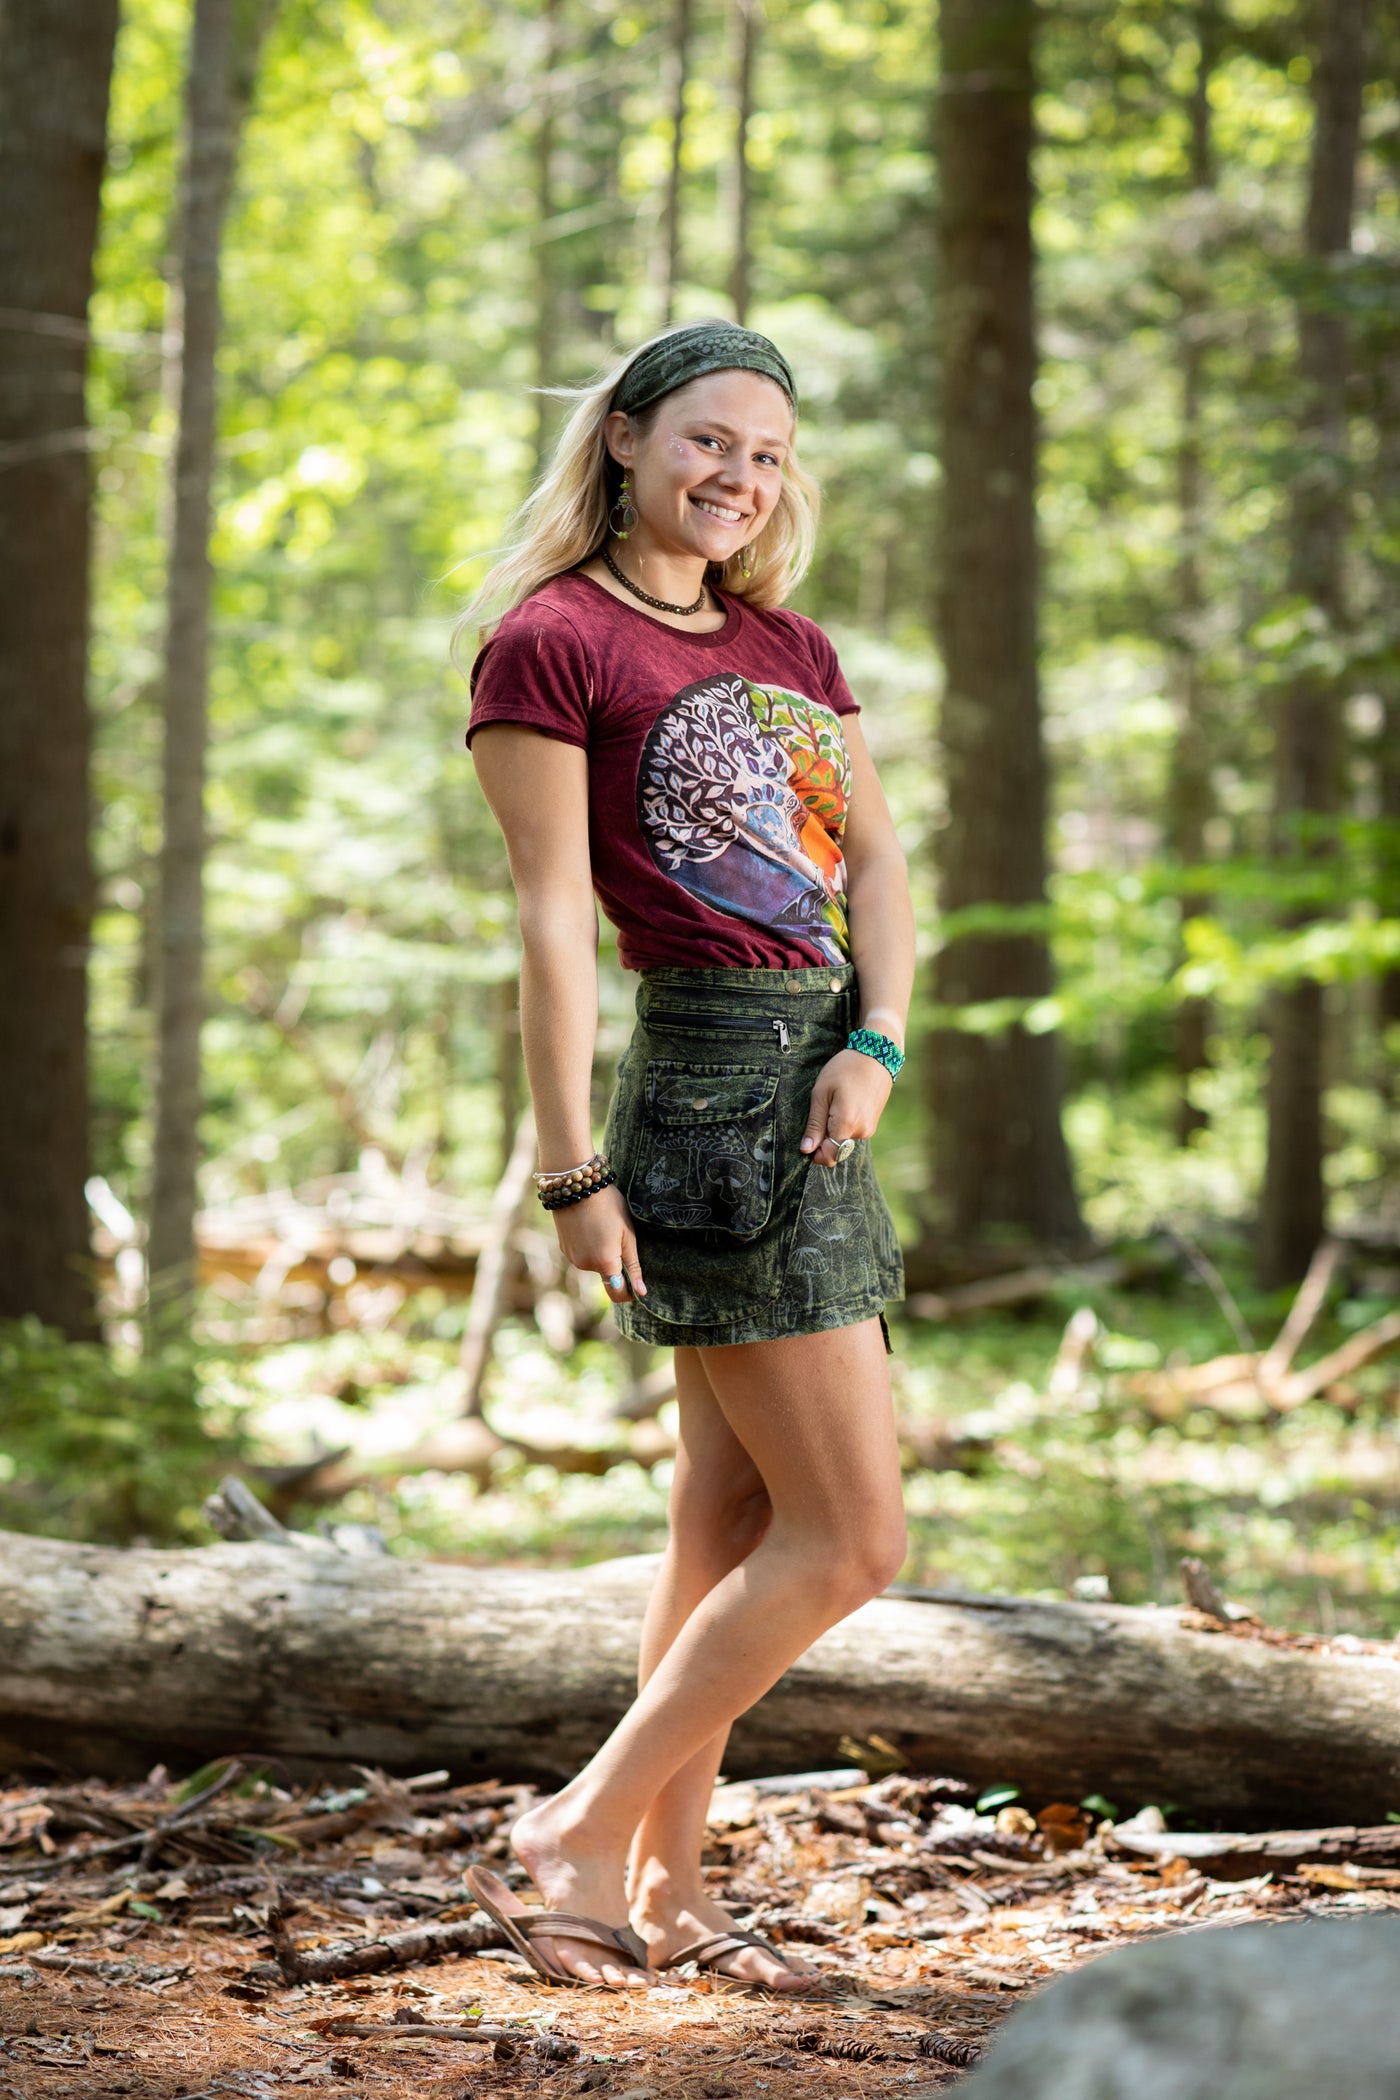 A beautiful blonde woman in the forest wearing a green mushroom headband, a maroon tree of life t shirt, and a green mushroom festival skirt